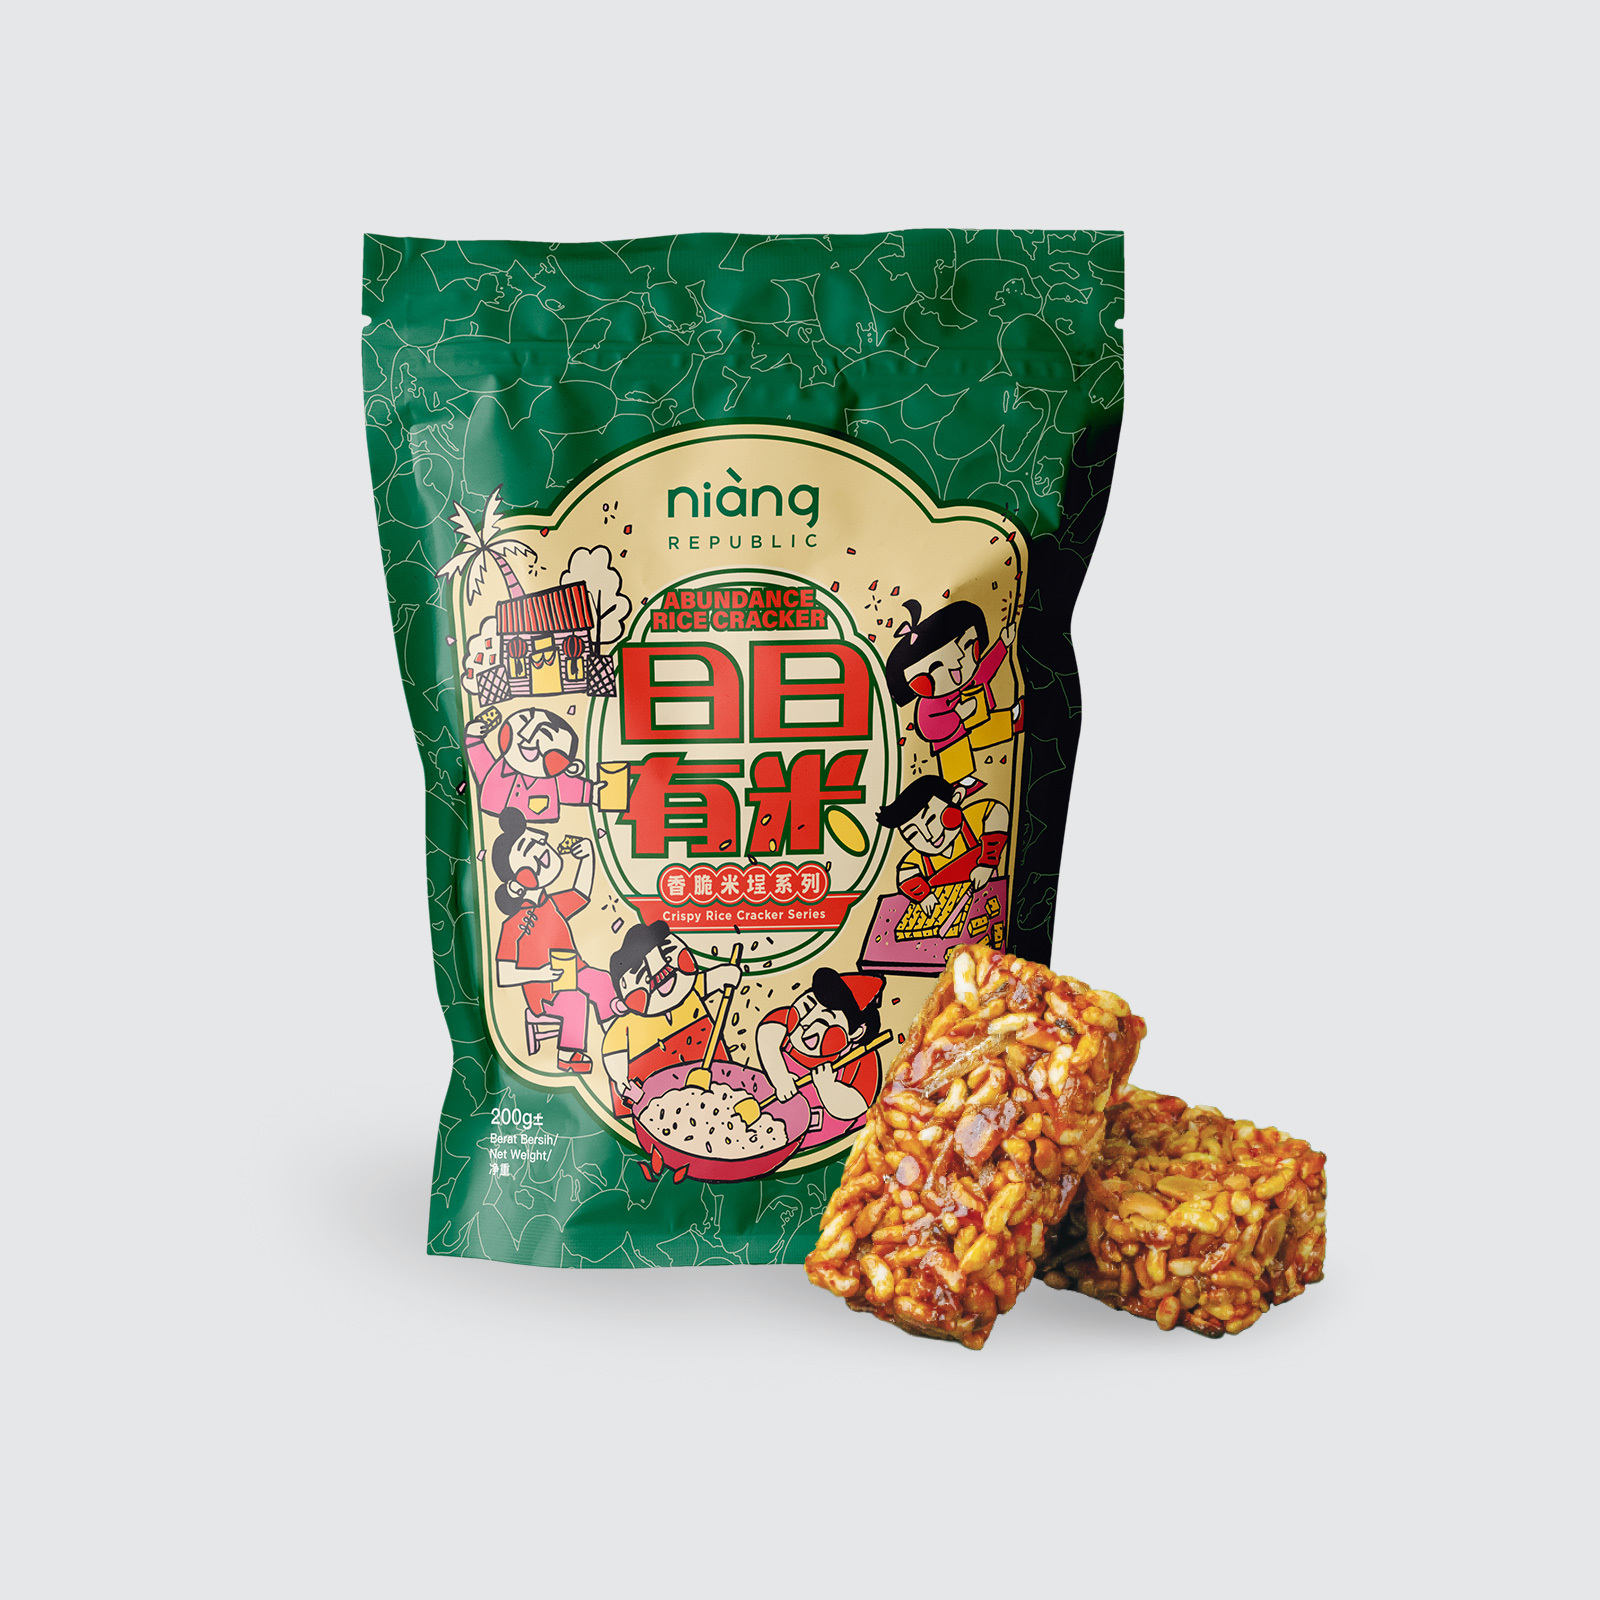 rice-cracker-4product-categories